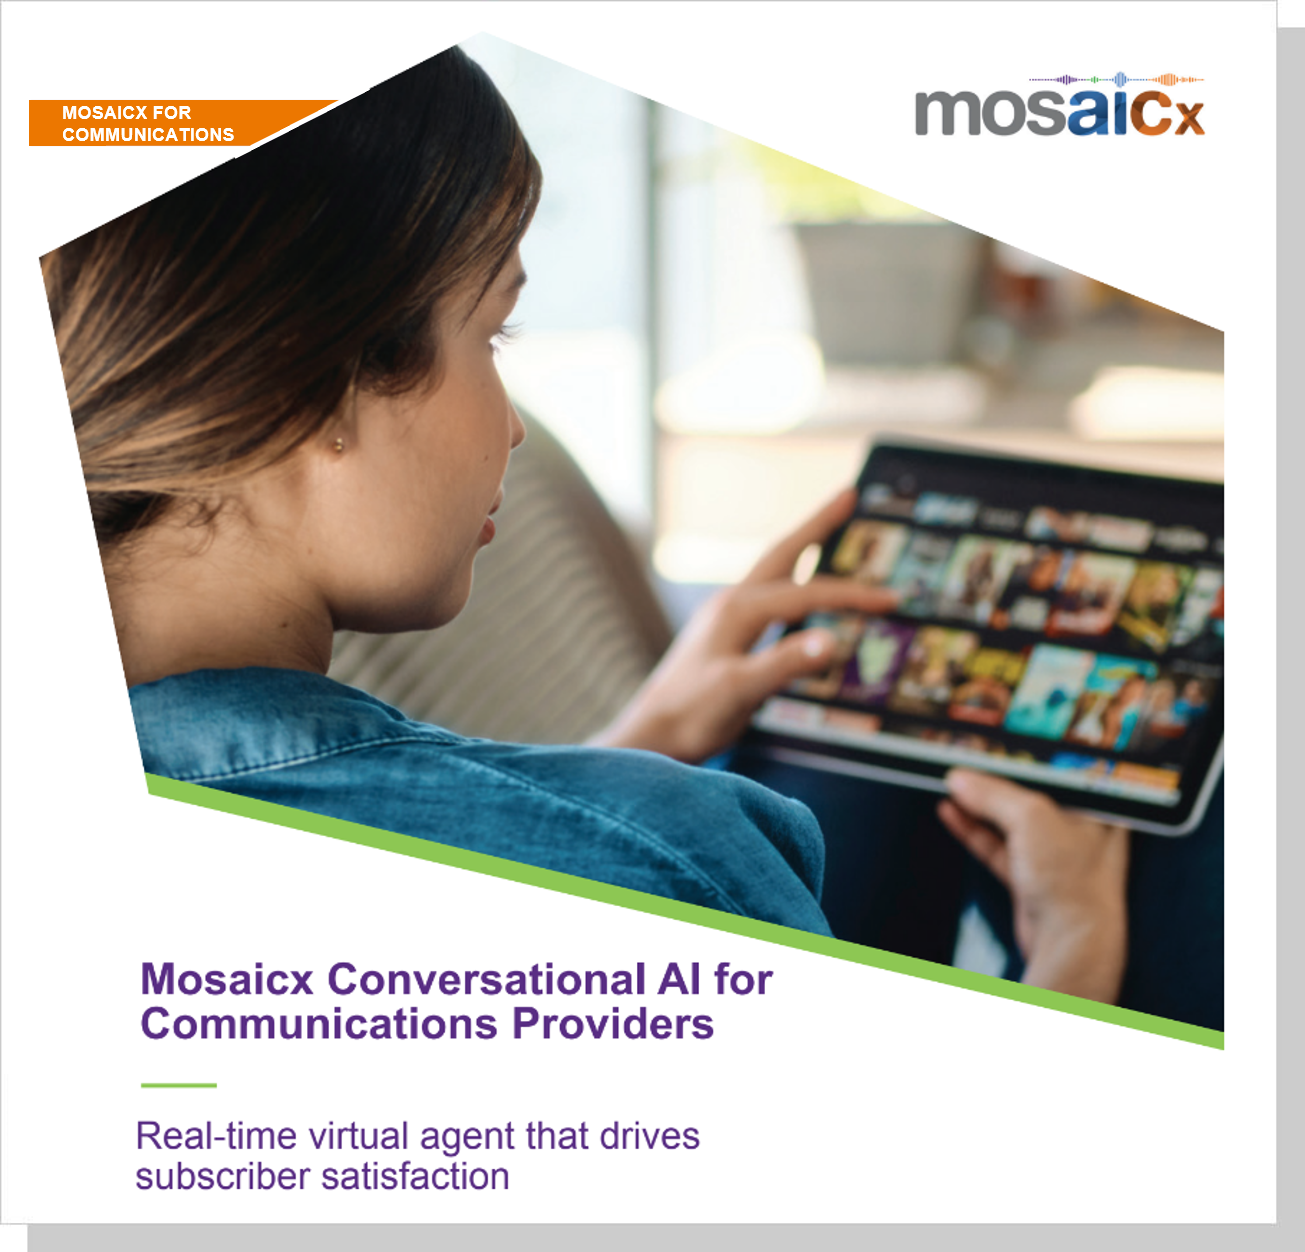 Mosaicx for Communications